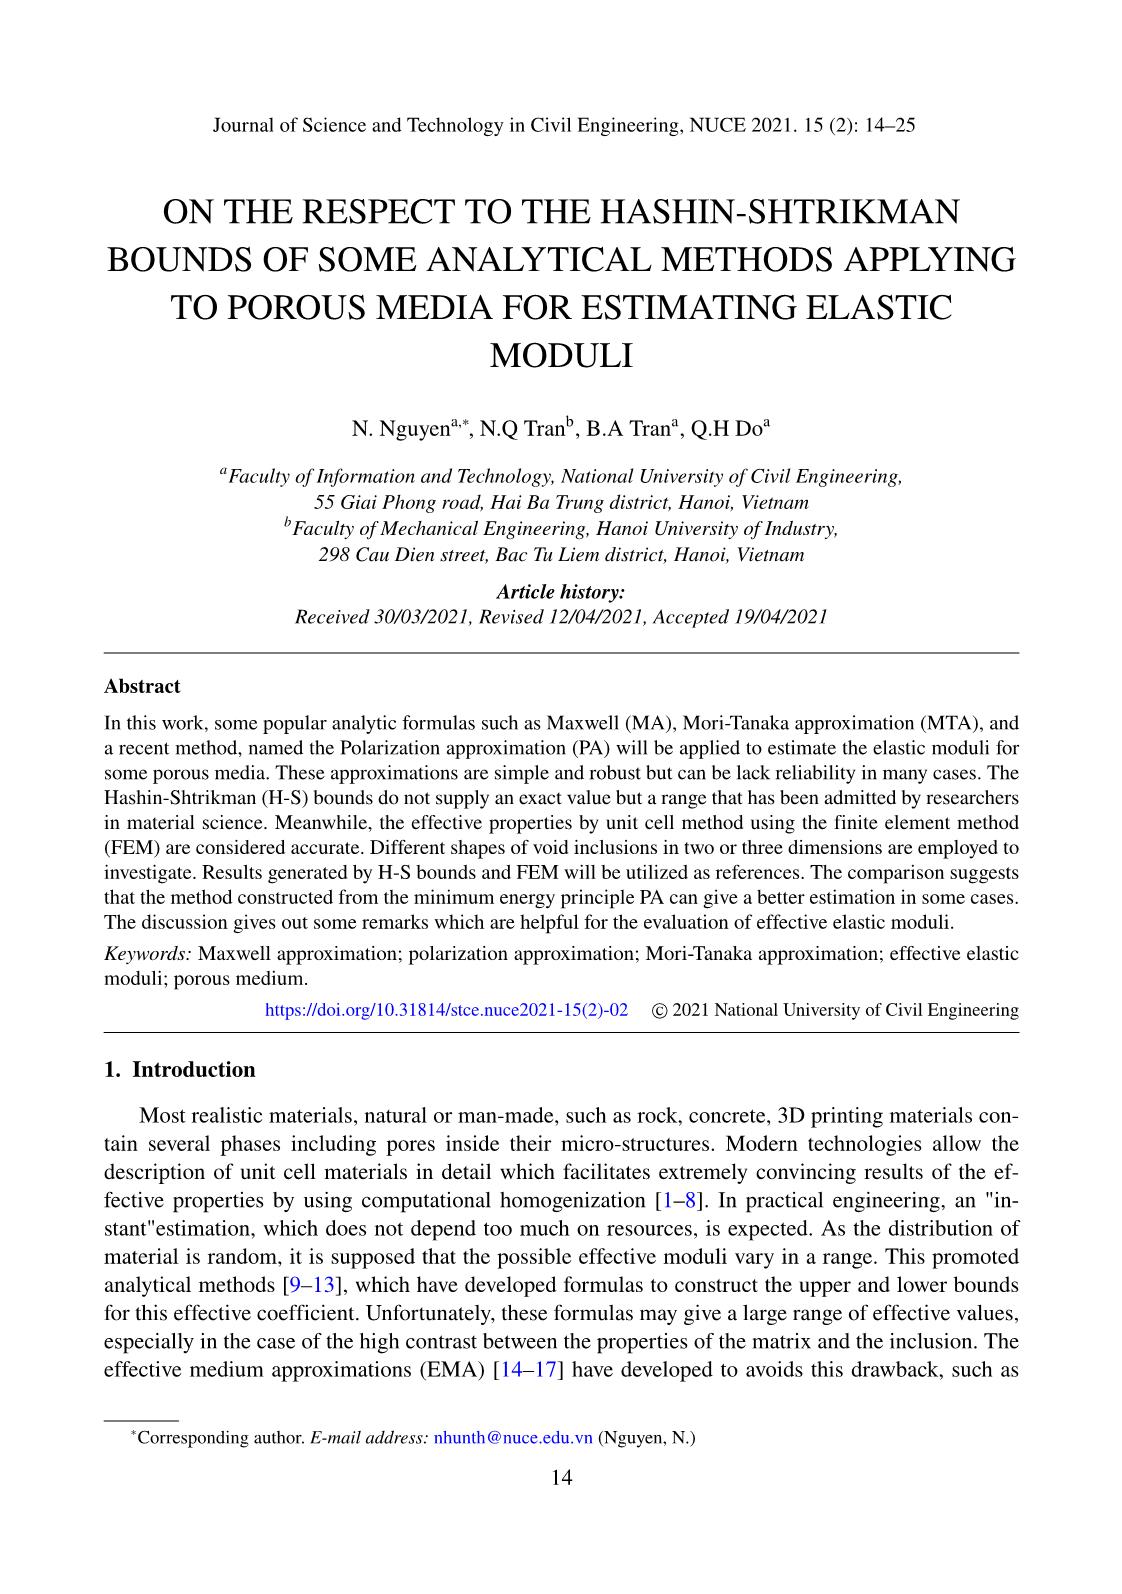 On the respect to the Hashin-Shtrikman bounds of some analytical methods applying to porous media for estimating elastic moduli trang 1